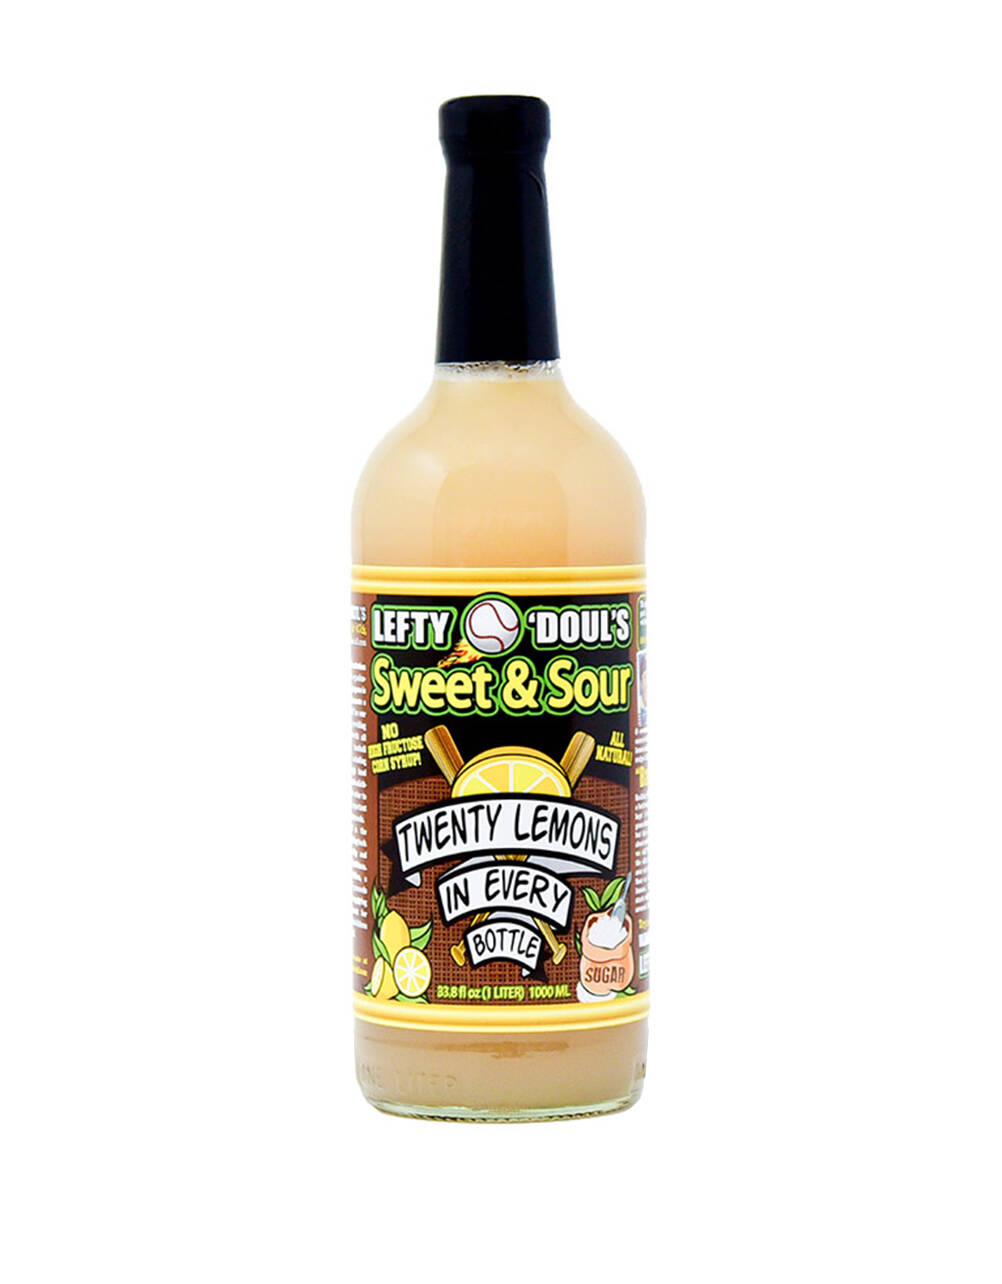 Lefty O’Doul’s Sweet and Sour Cocktail Mixes 1L